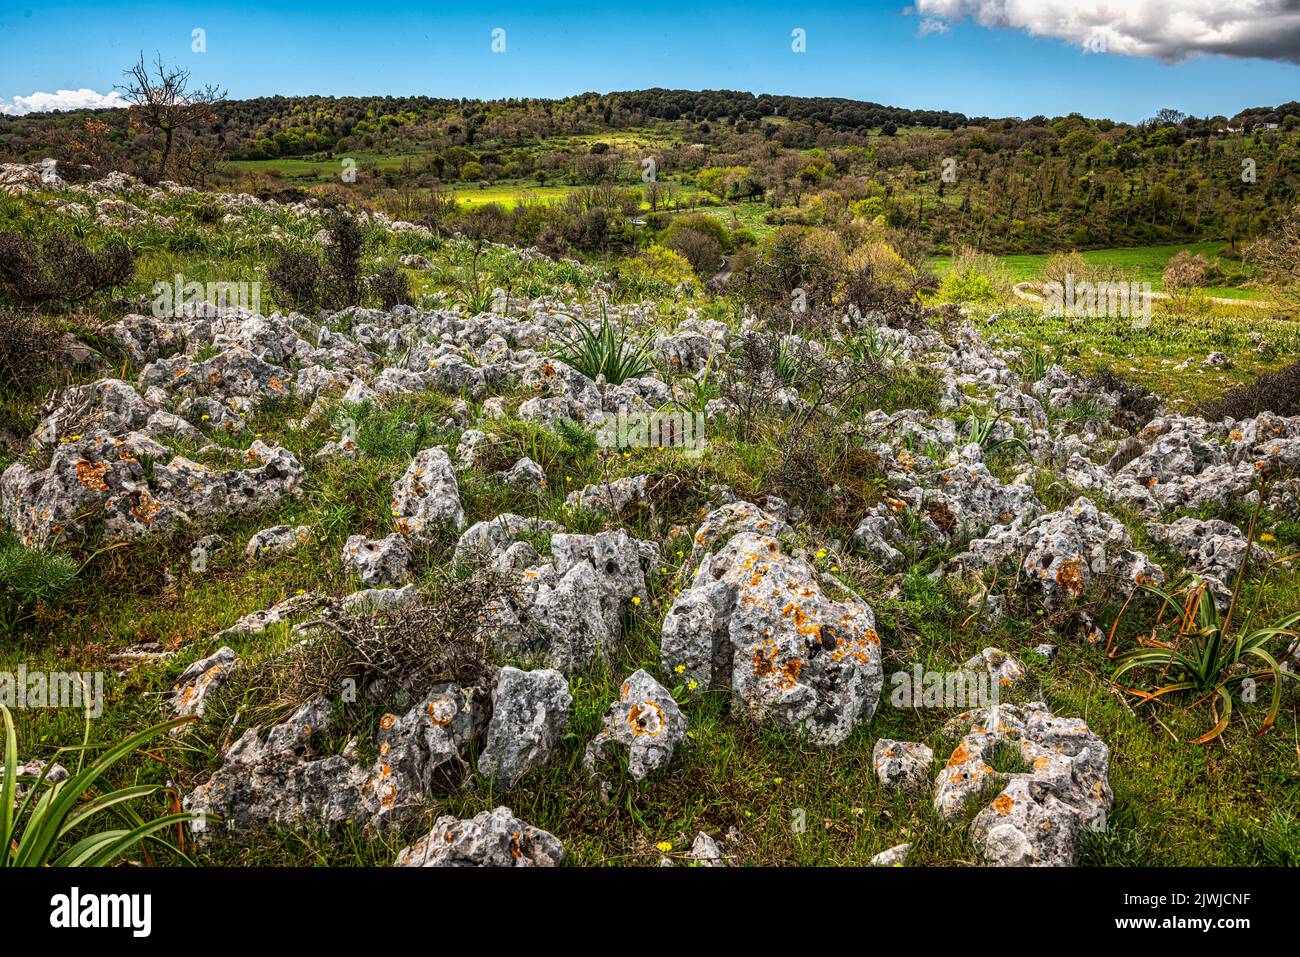 Hilly landscape in the Umbra forest in Apulia. In the foreground, an expanse of rocks emerging from the ground. Gargano National Park, Puglia, Italy, Stock Photo